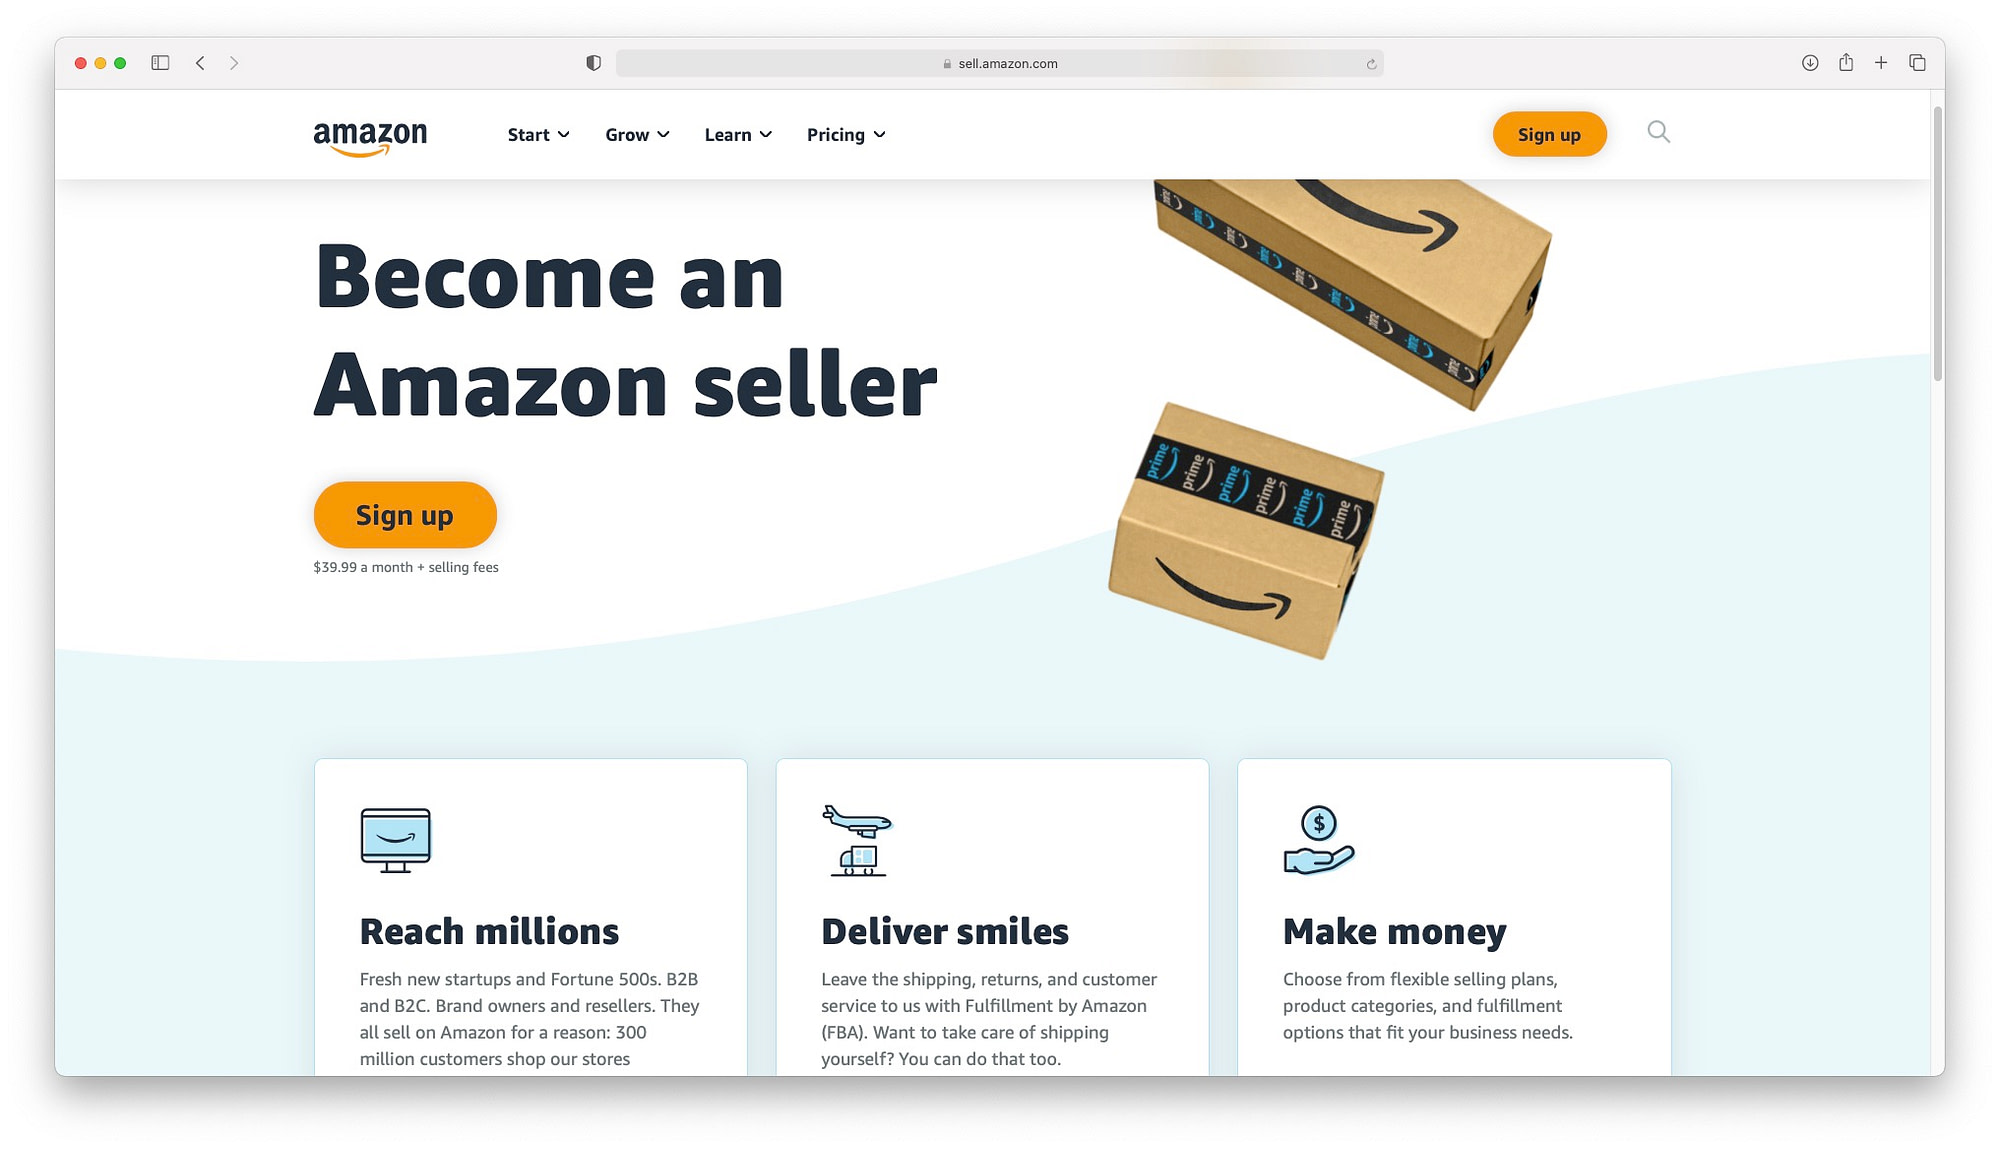 It is easy to sell online when you sign up with Amazon